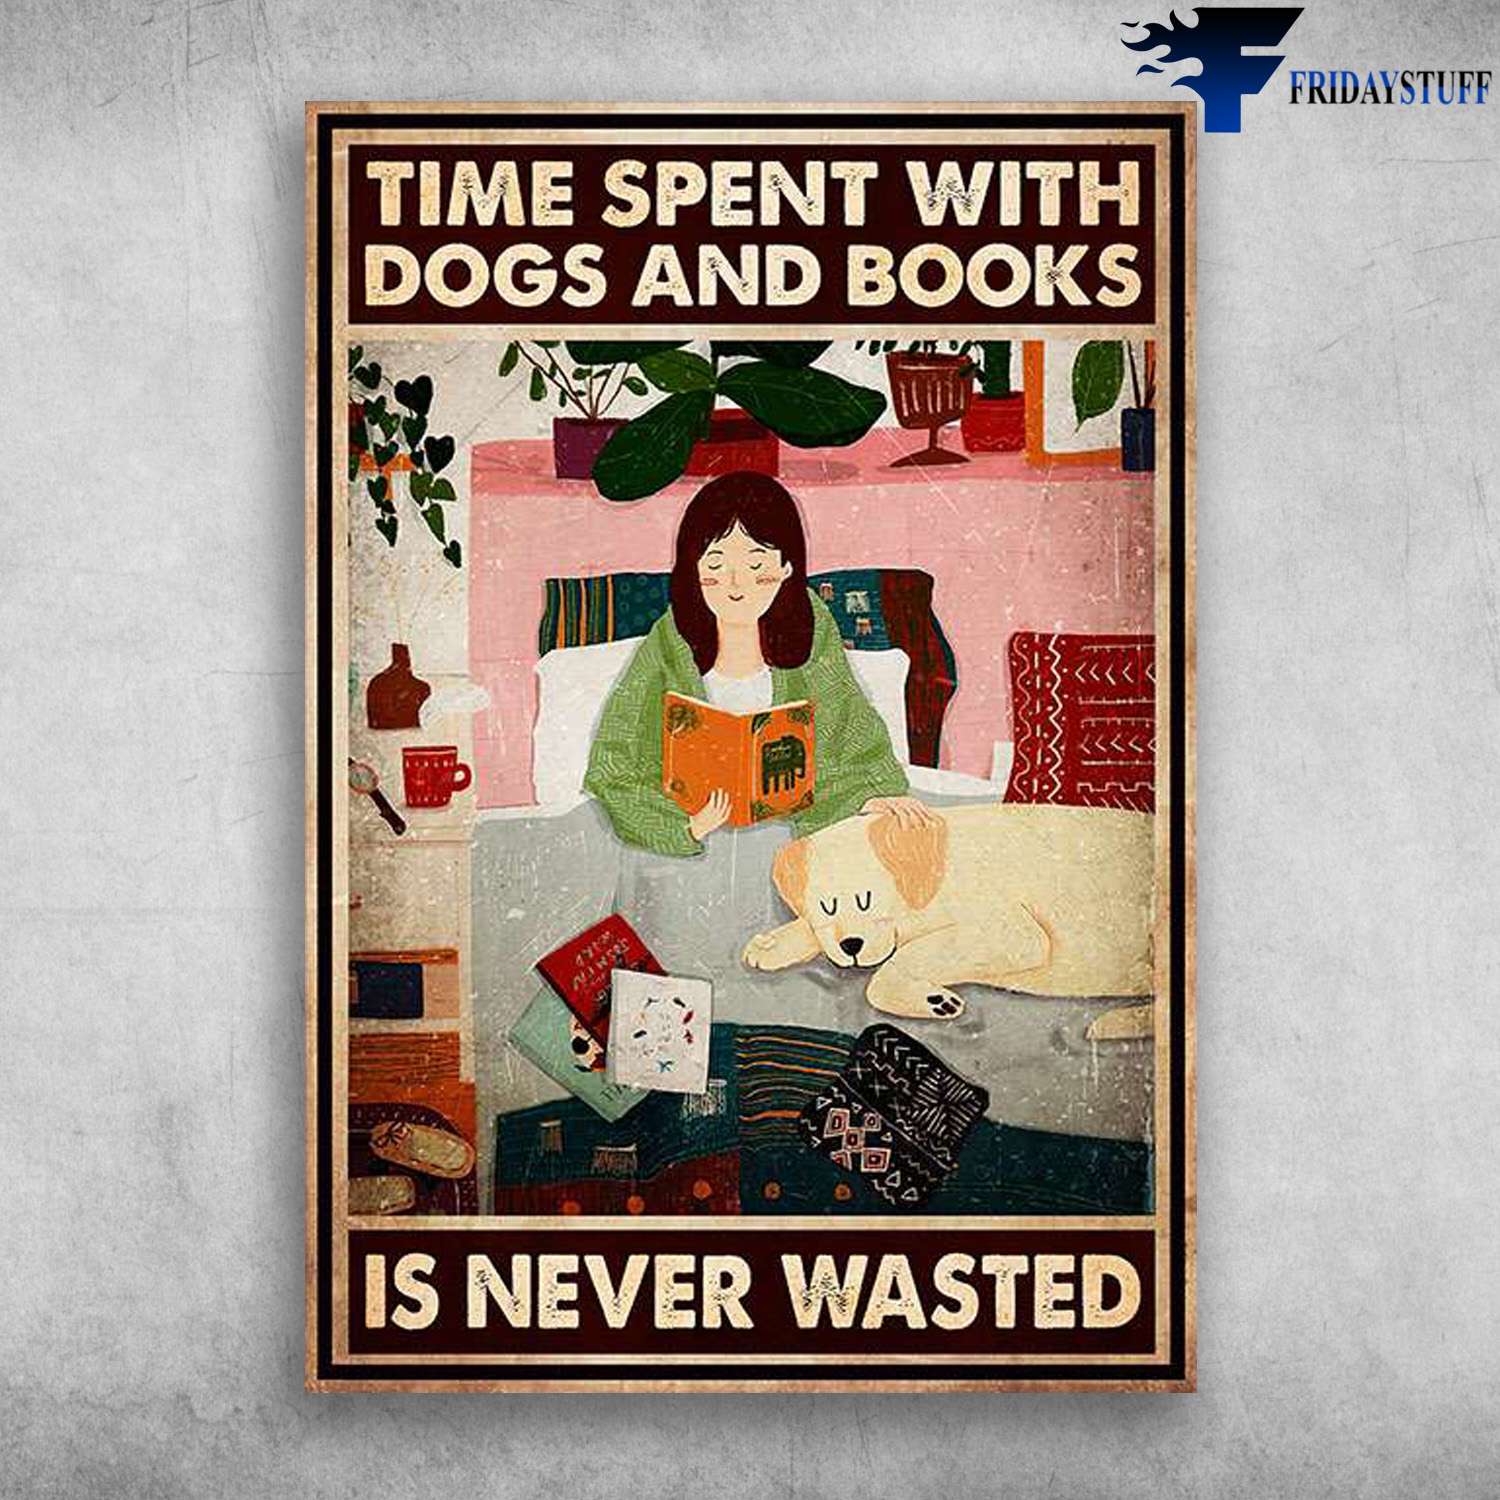 Girl Reading, Book And Dog - Time Spent With Dogs And Books, Is Never Wasted